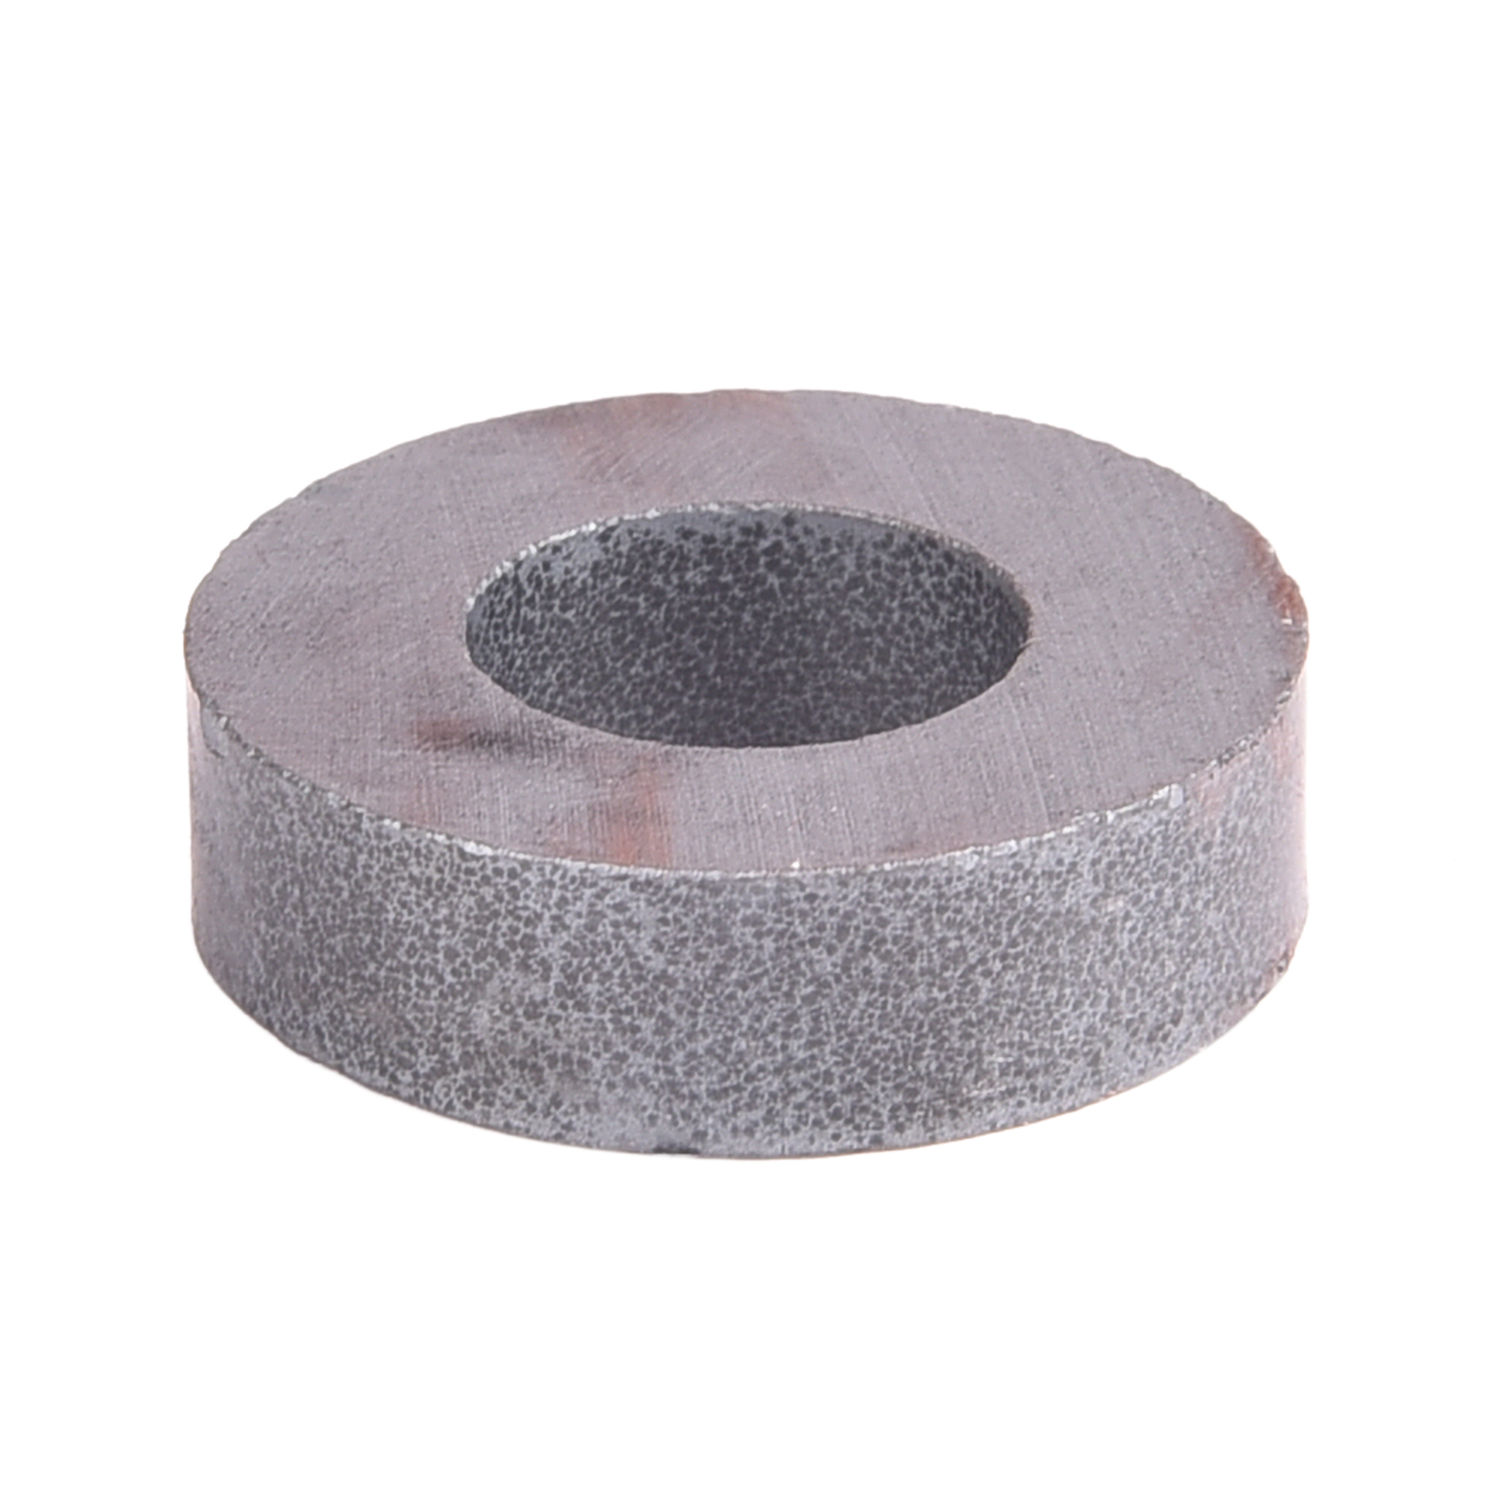 Large Ring Magnets 6 in OD x 3 in ID x 1/2 in Neodymium Rare Earth -  Applied Magnets - Magnet4less